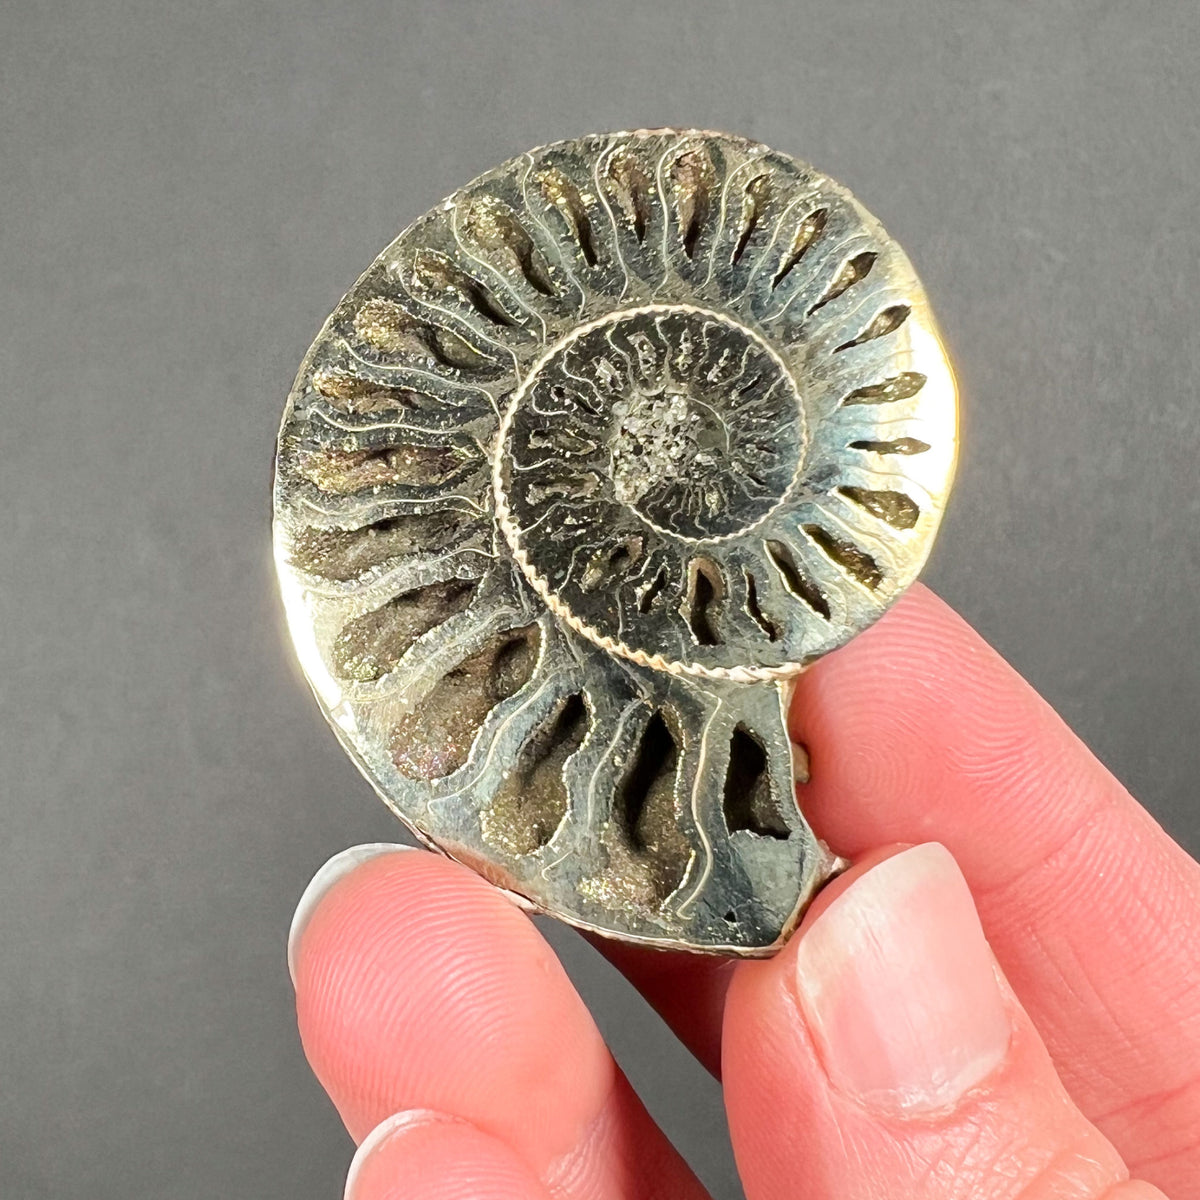 Ammonite Shell with Pyrite